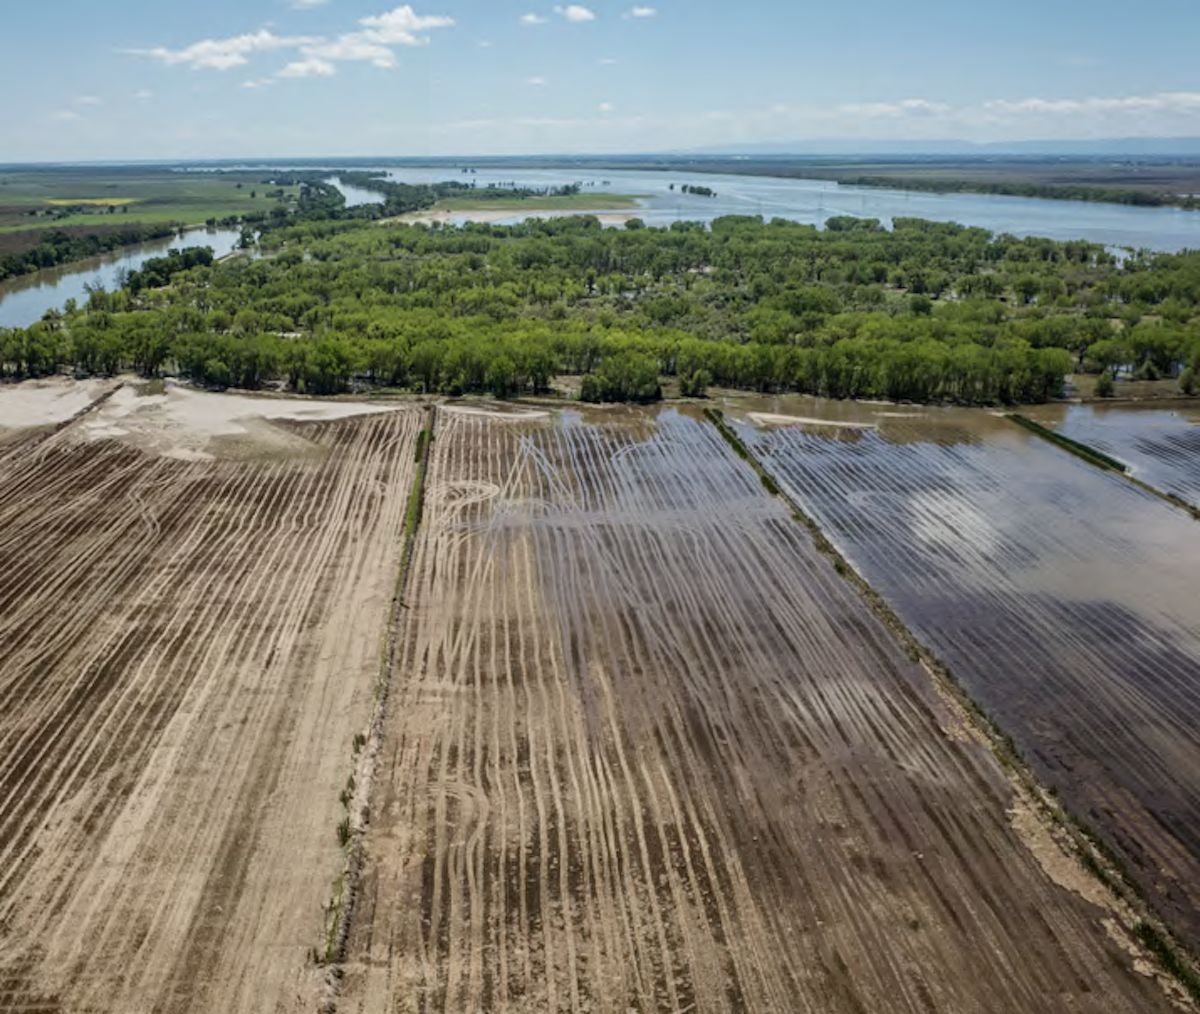 postharvest agricultural fields being flooded to decompose agricultural waste and provide surrogate wetlands for migratory birds in the sutter bypass